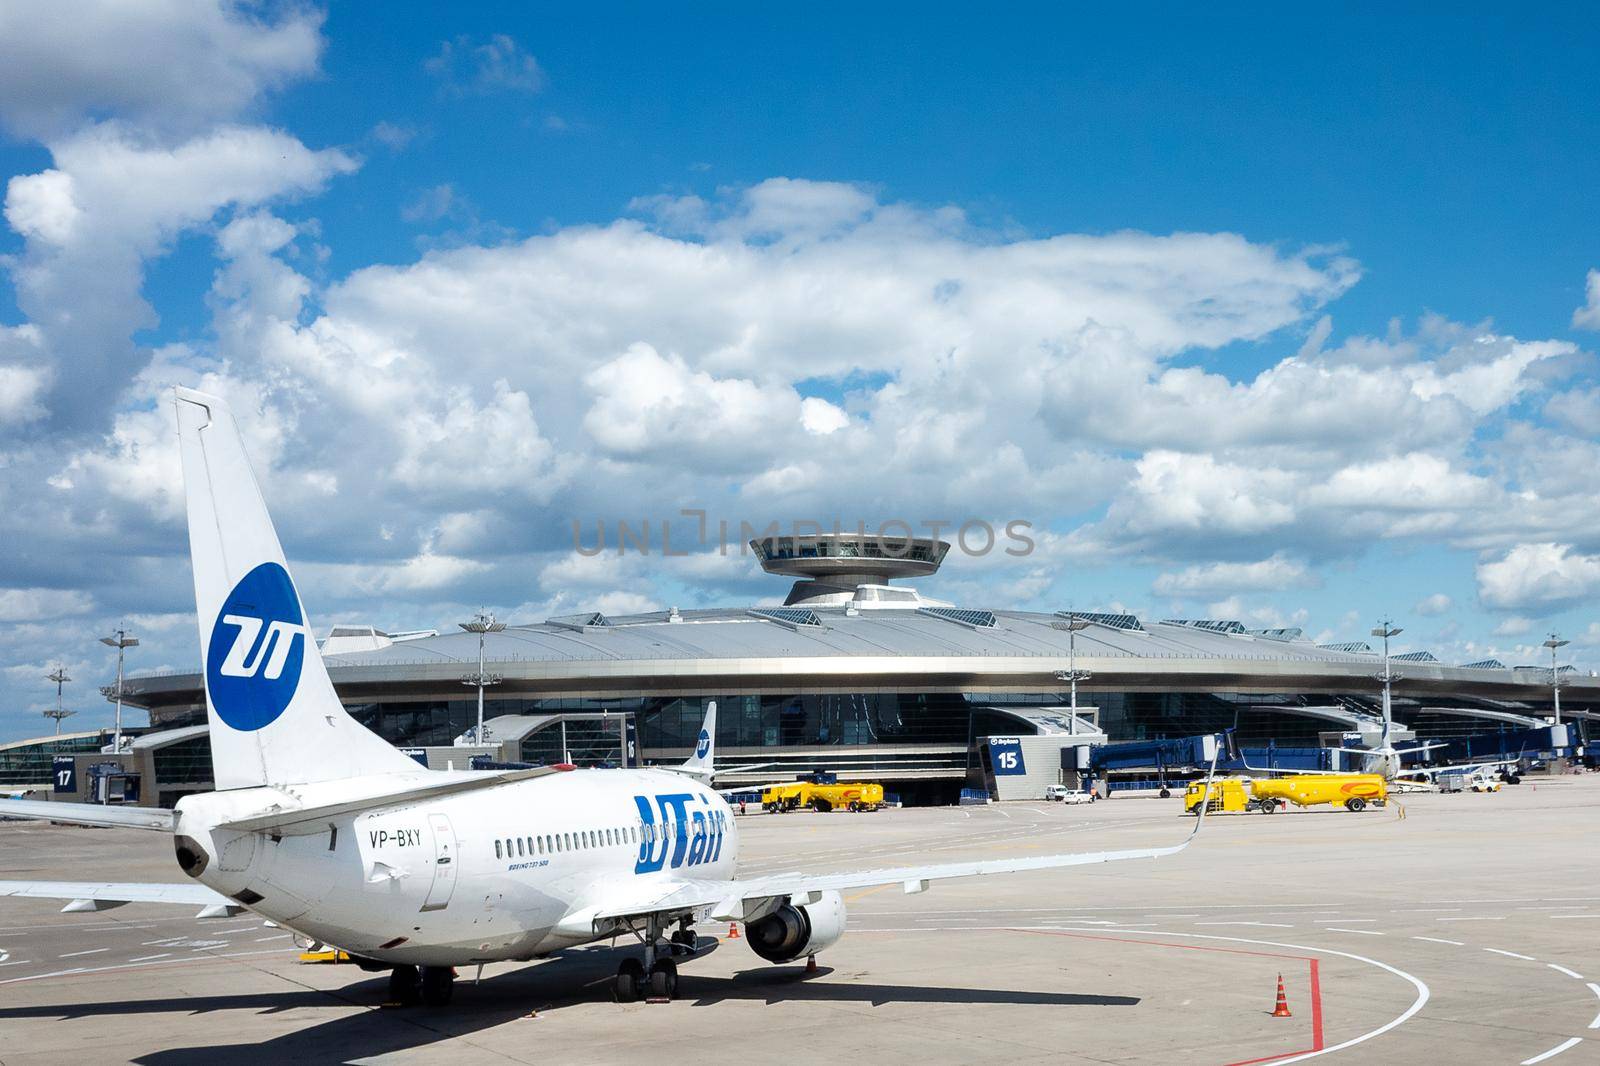 July 2, 2019, Moscow, Russia. The plane Boeing 737 of the airline Utair on the airfield of Vnukovo airport.